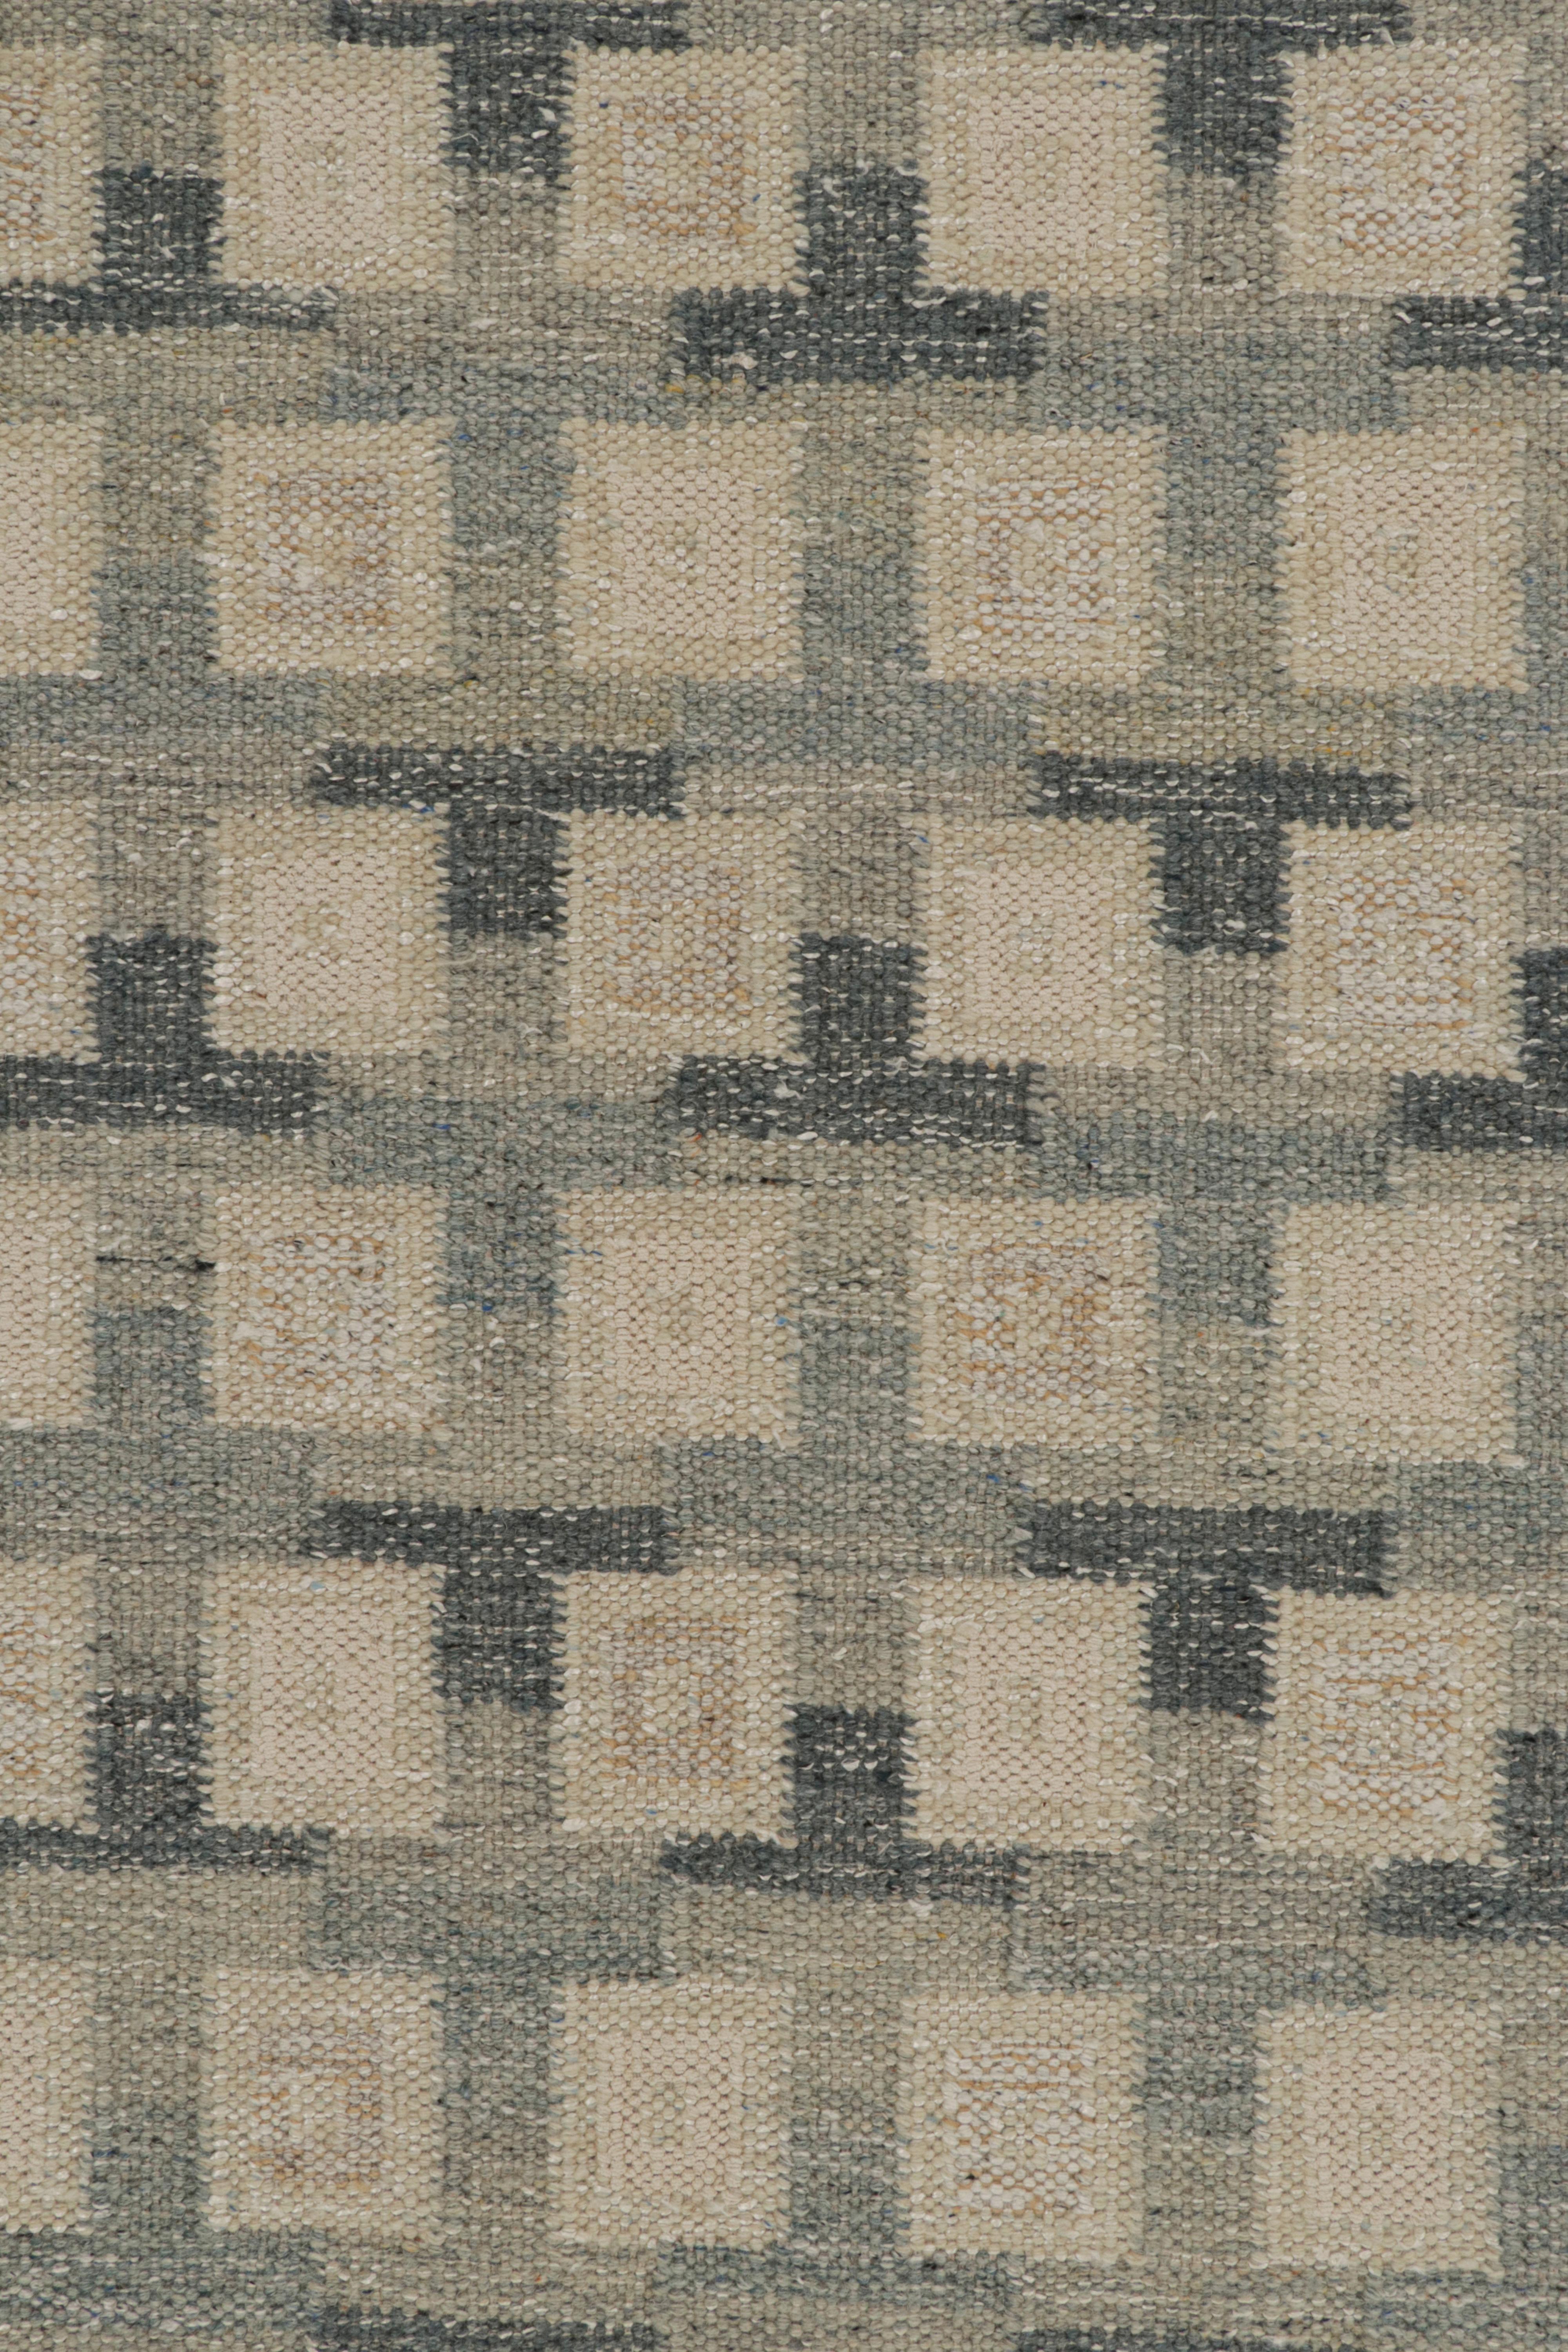 Rug & Kilim’s Scandinavian Style Custom Kilim in Beige & Gray Geometric Pattern In New Condition For Sale In Long Island City, NY